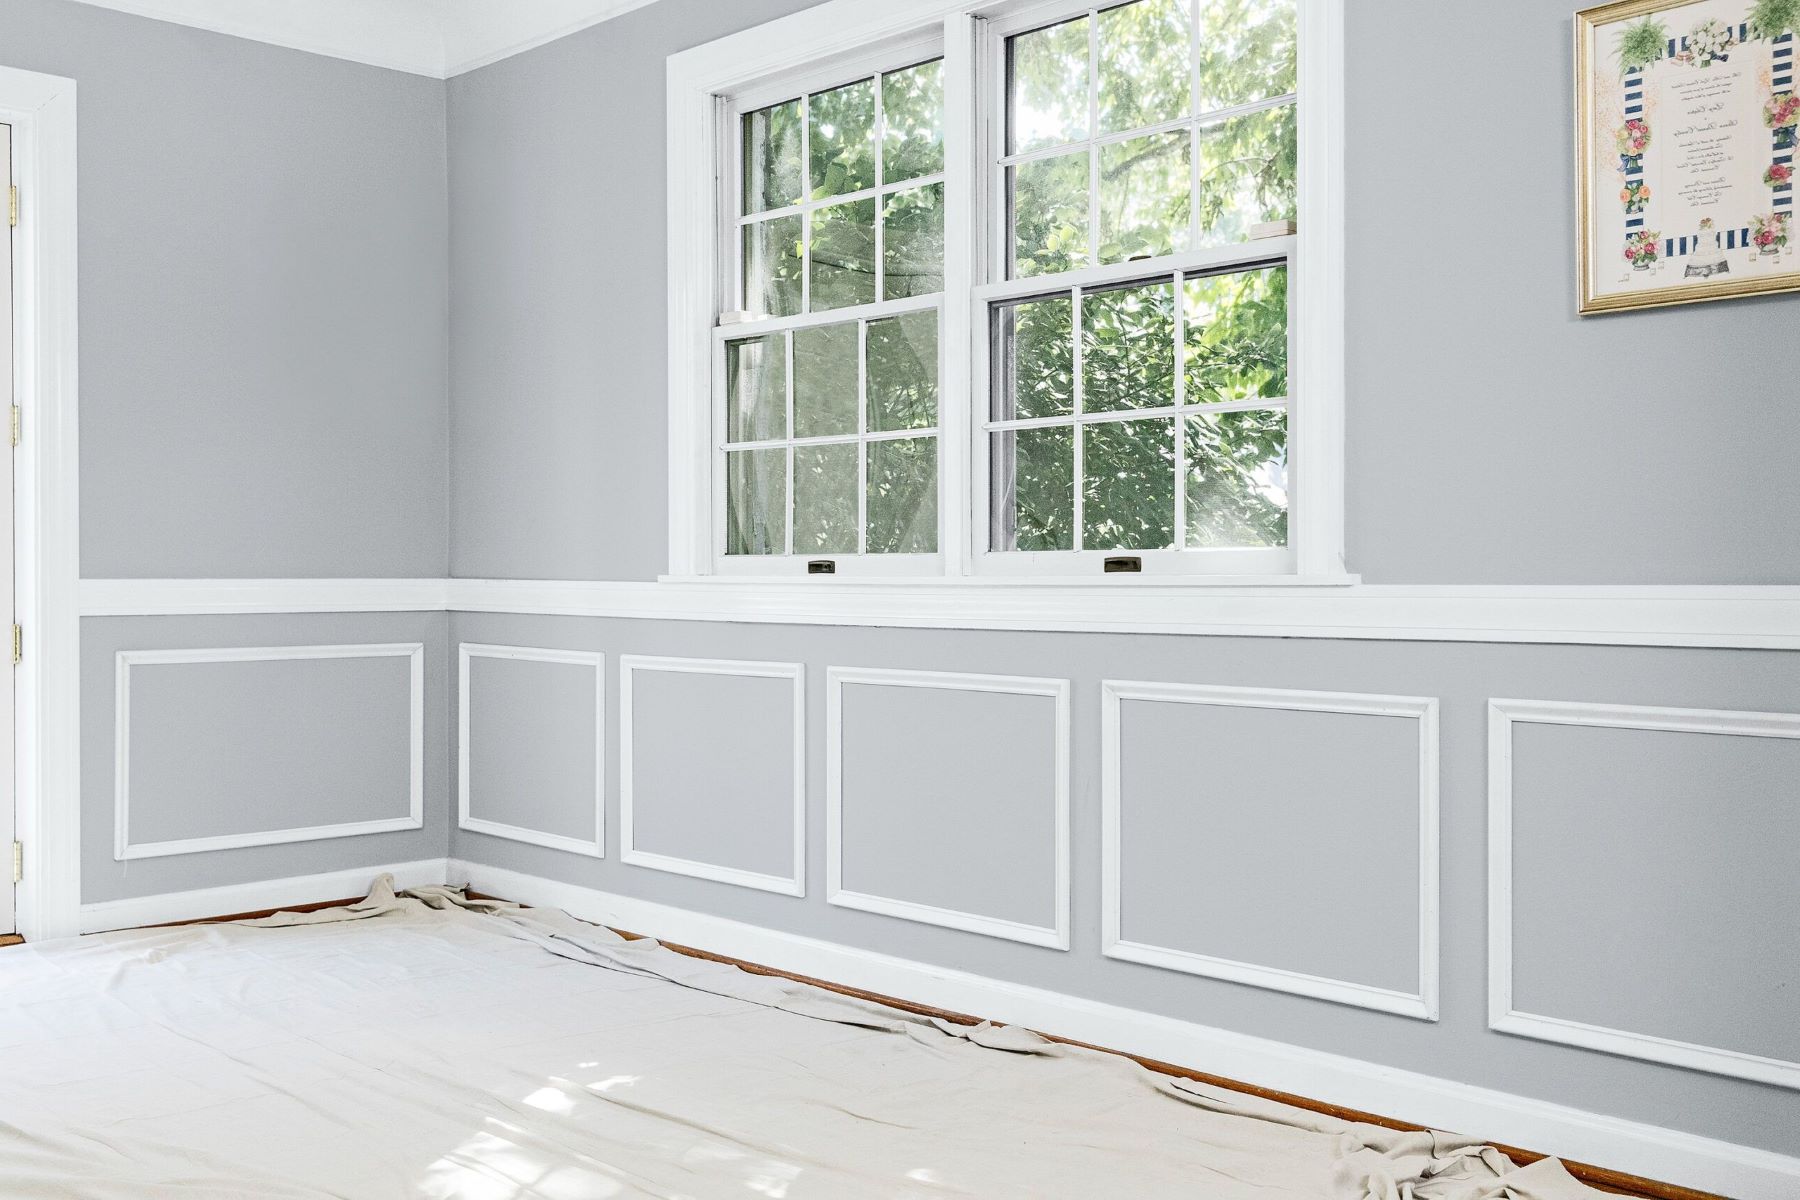 DIY Wainscoting: Step-by-step Guide